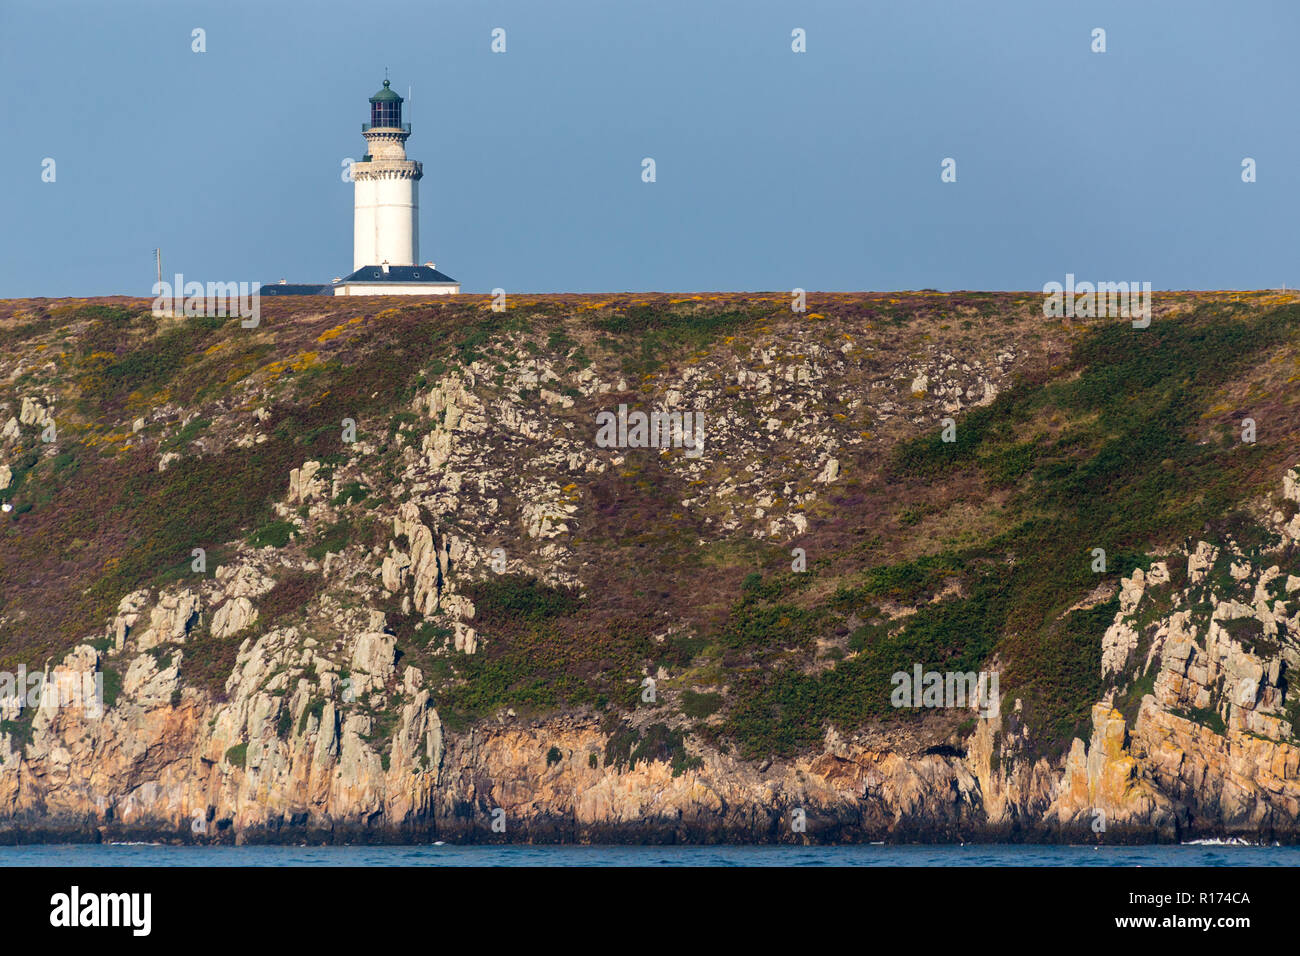 The Stiff lighthouse on the cliff top in ushant island, Brittany, France Stock Photo